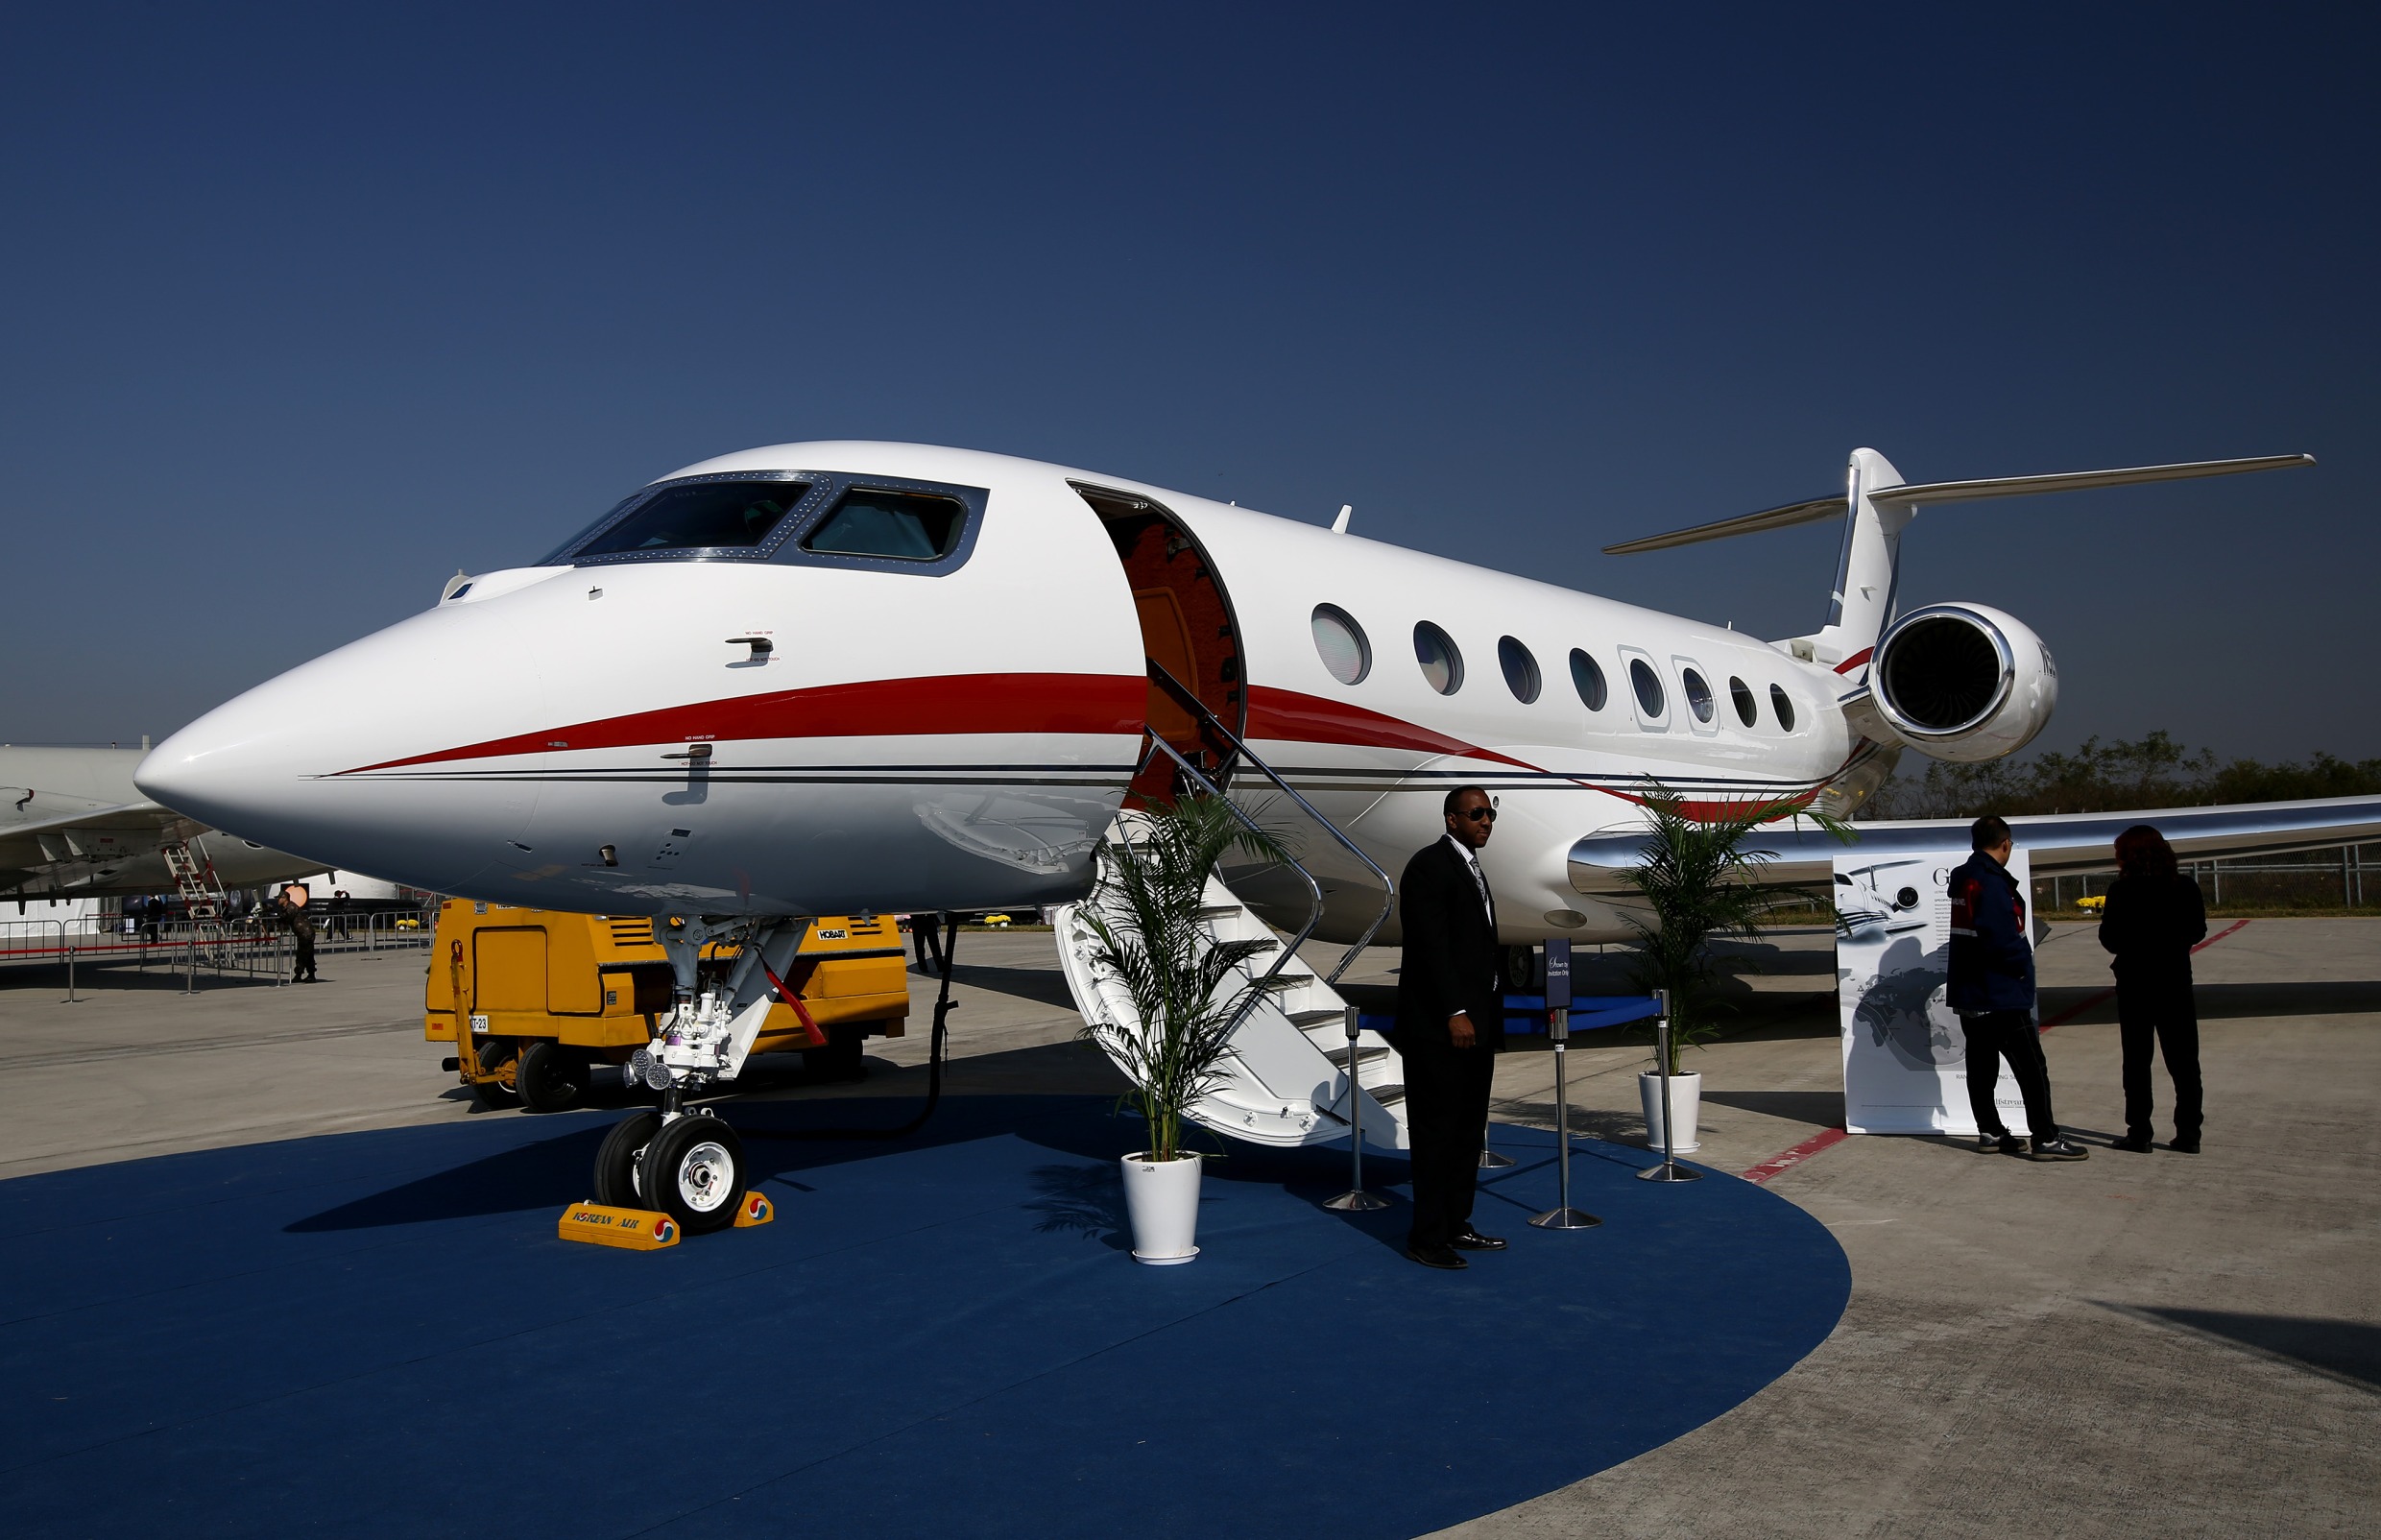 Compare prices for Gulfstream-Komfort across all European